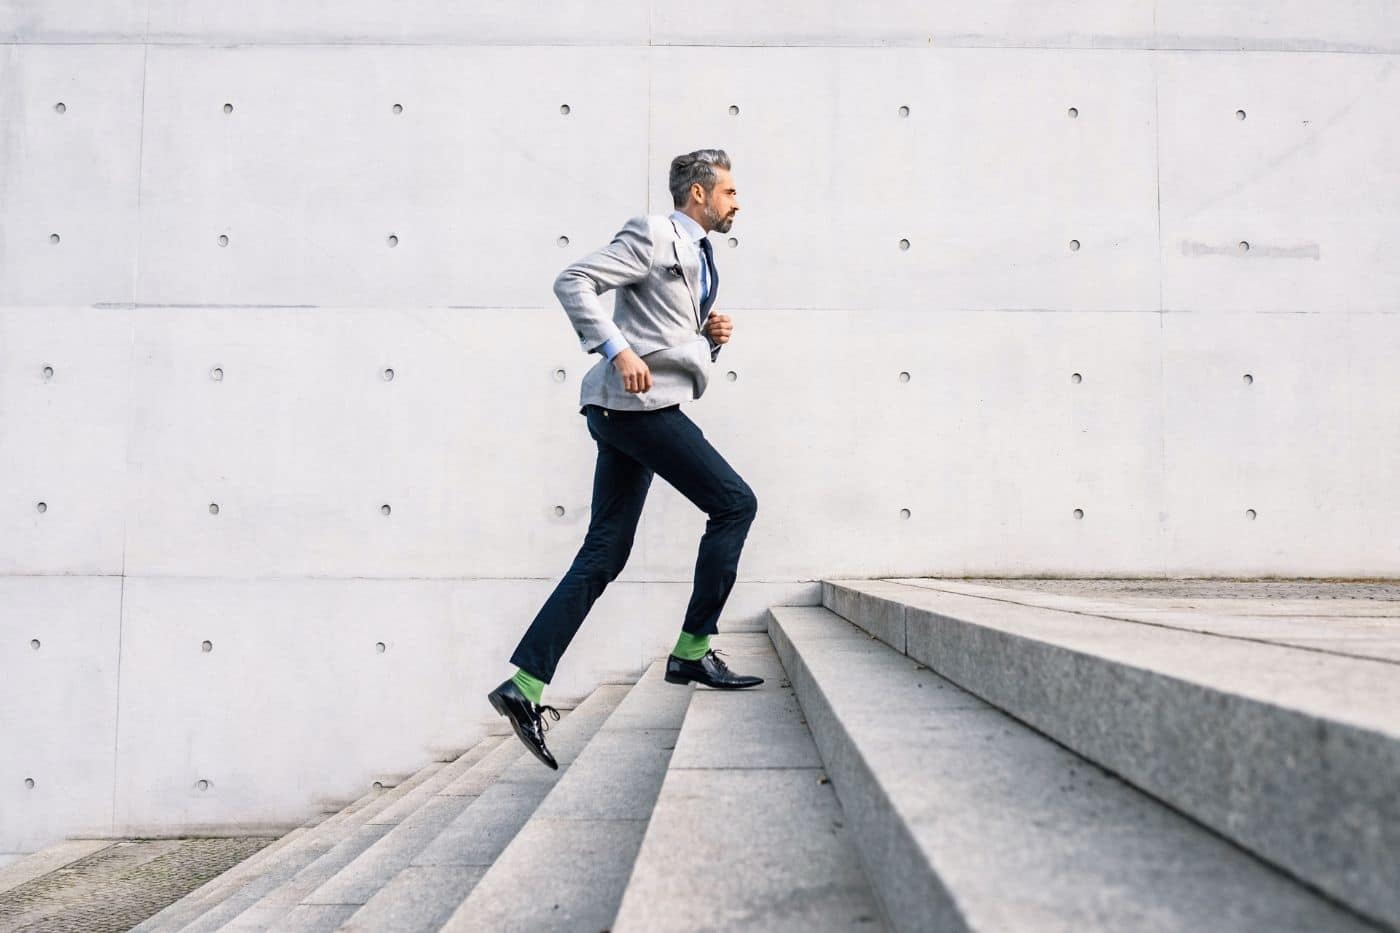 Man in suit with green socks running up stairs.